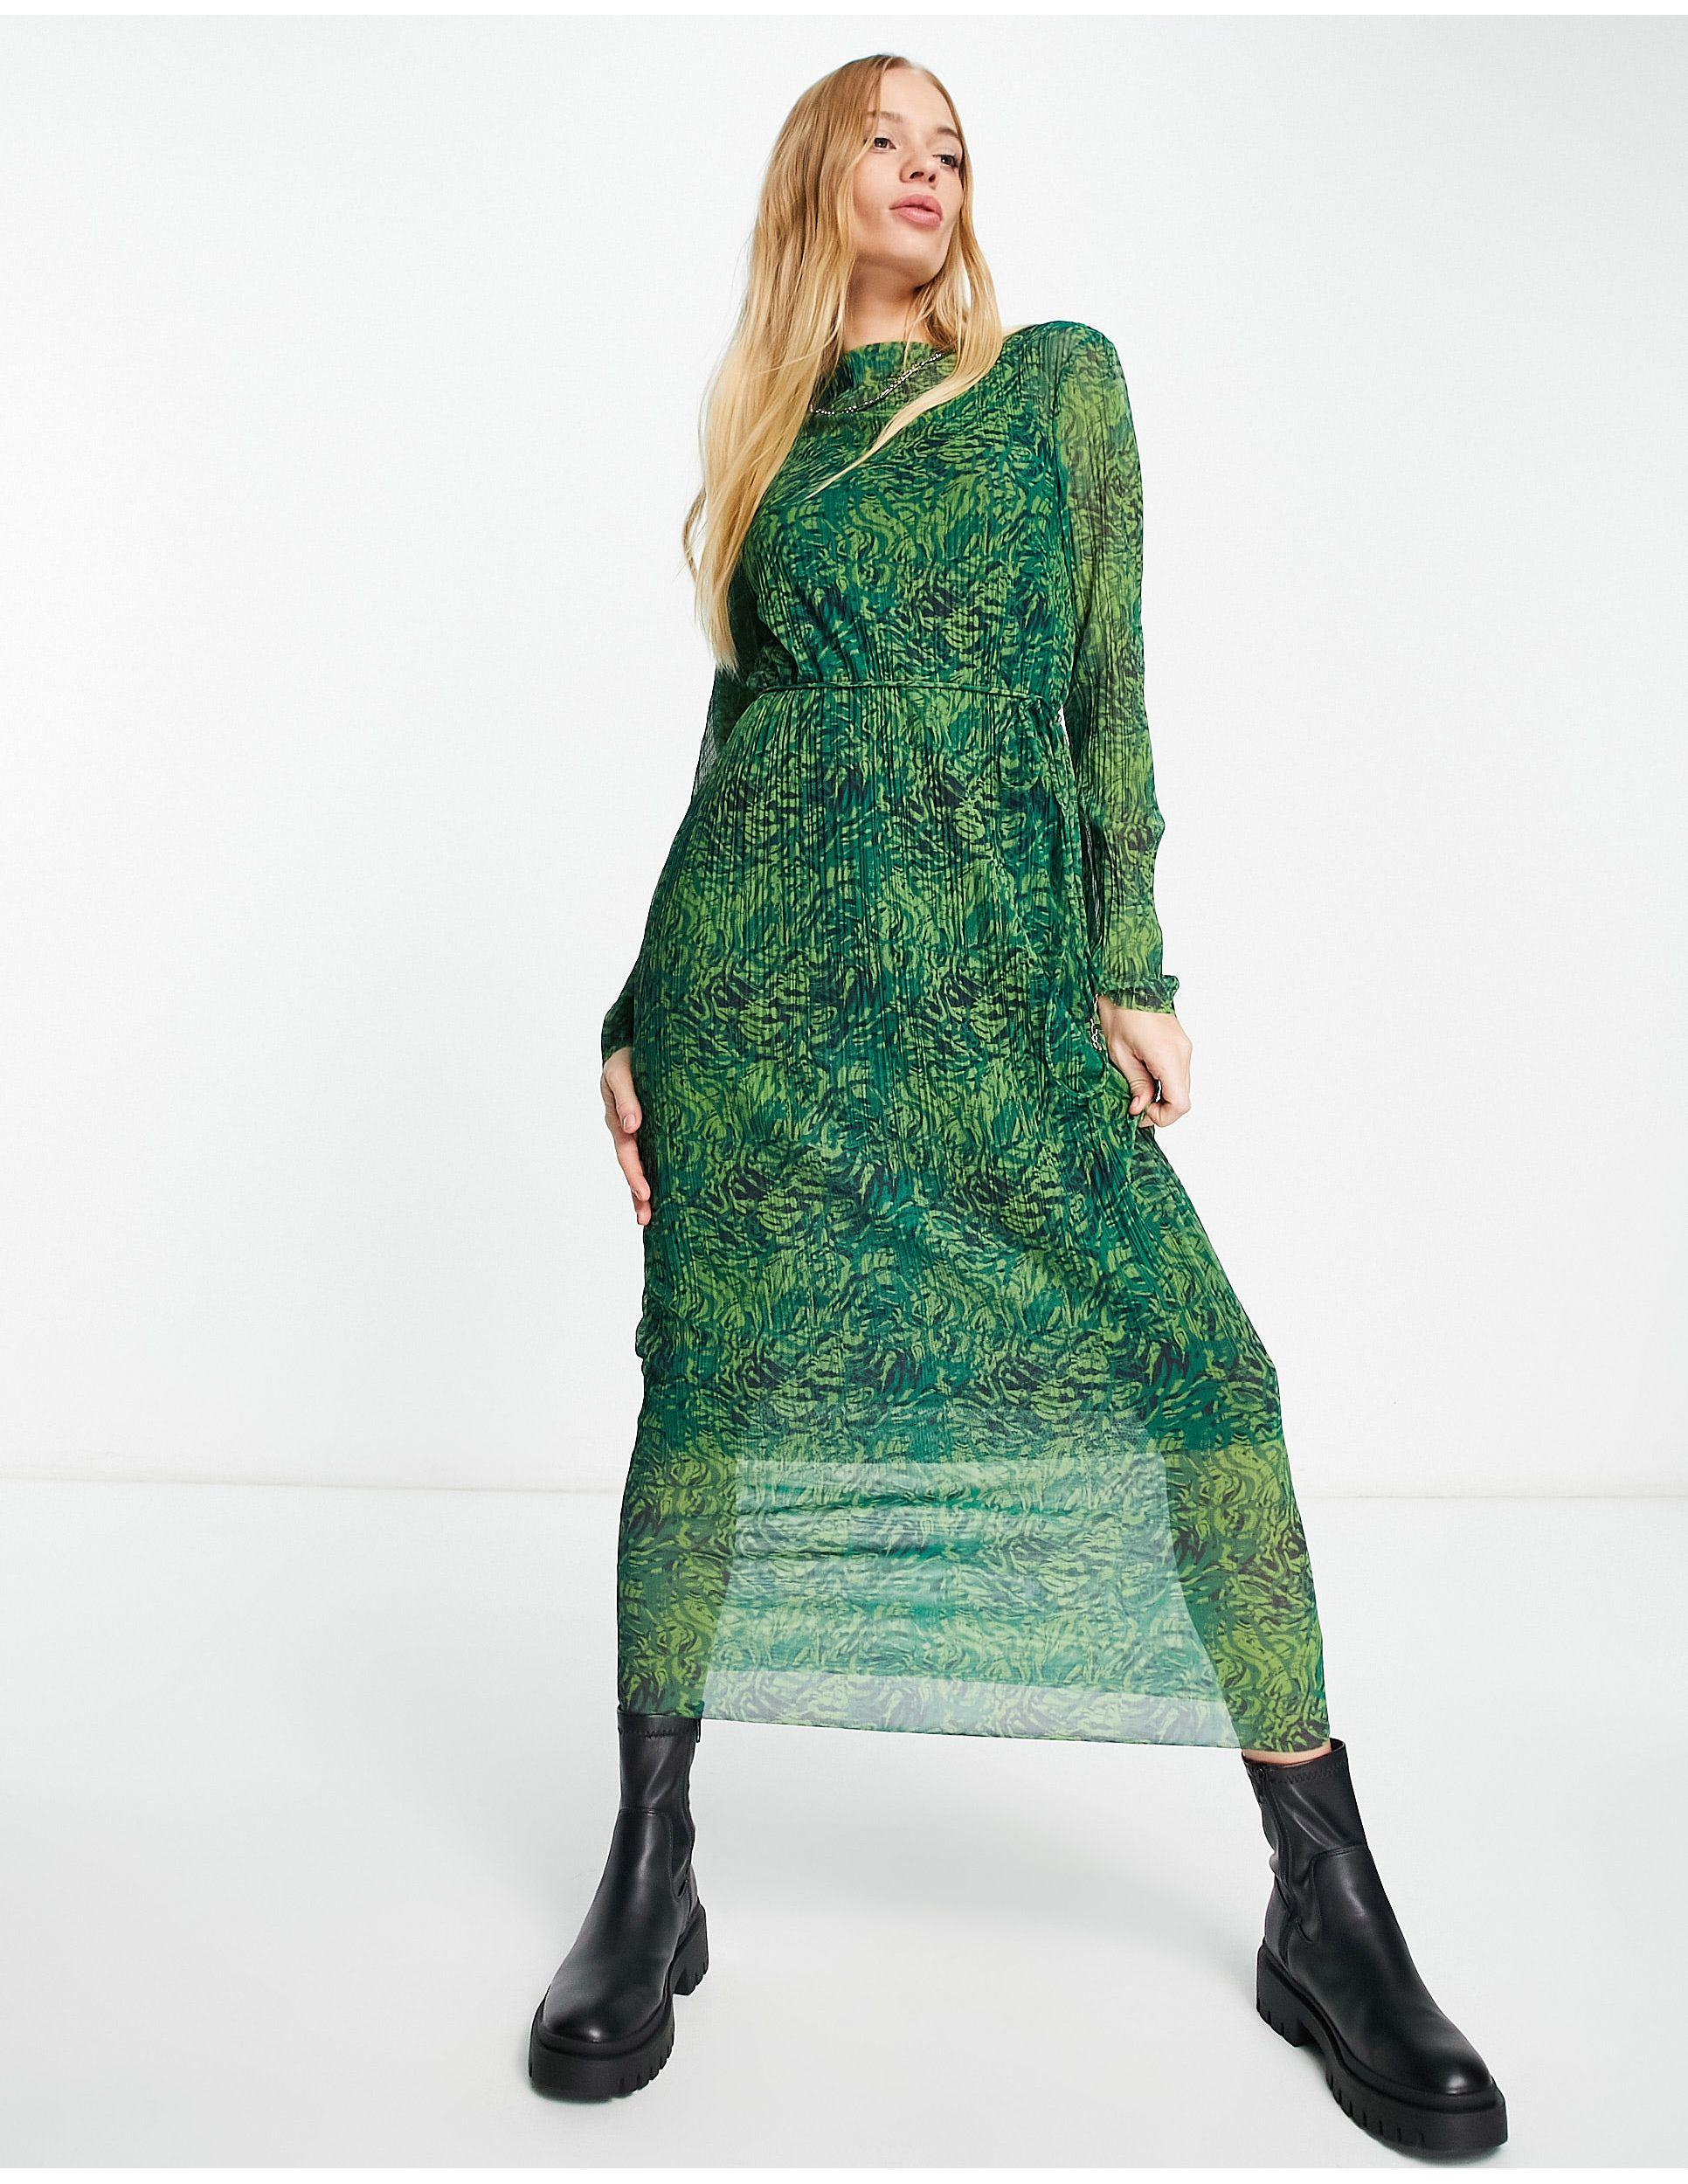 & Other Stories Mesh Midi Dress in Green | Lyst